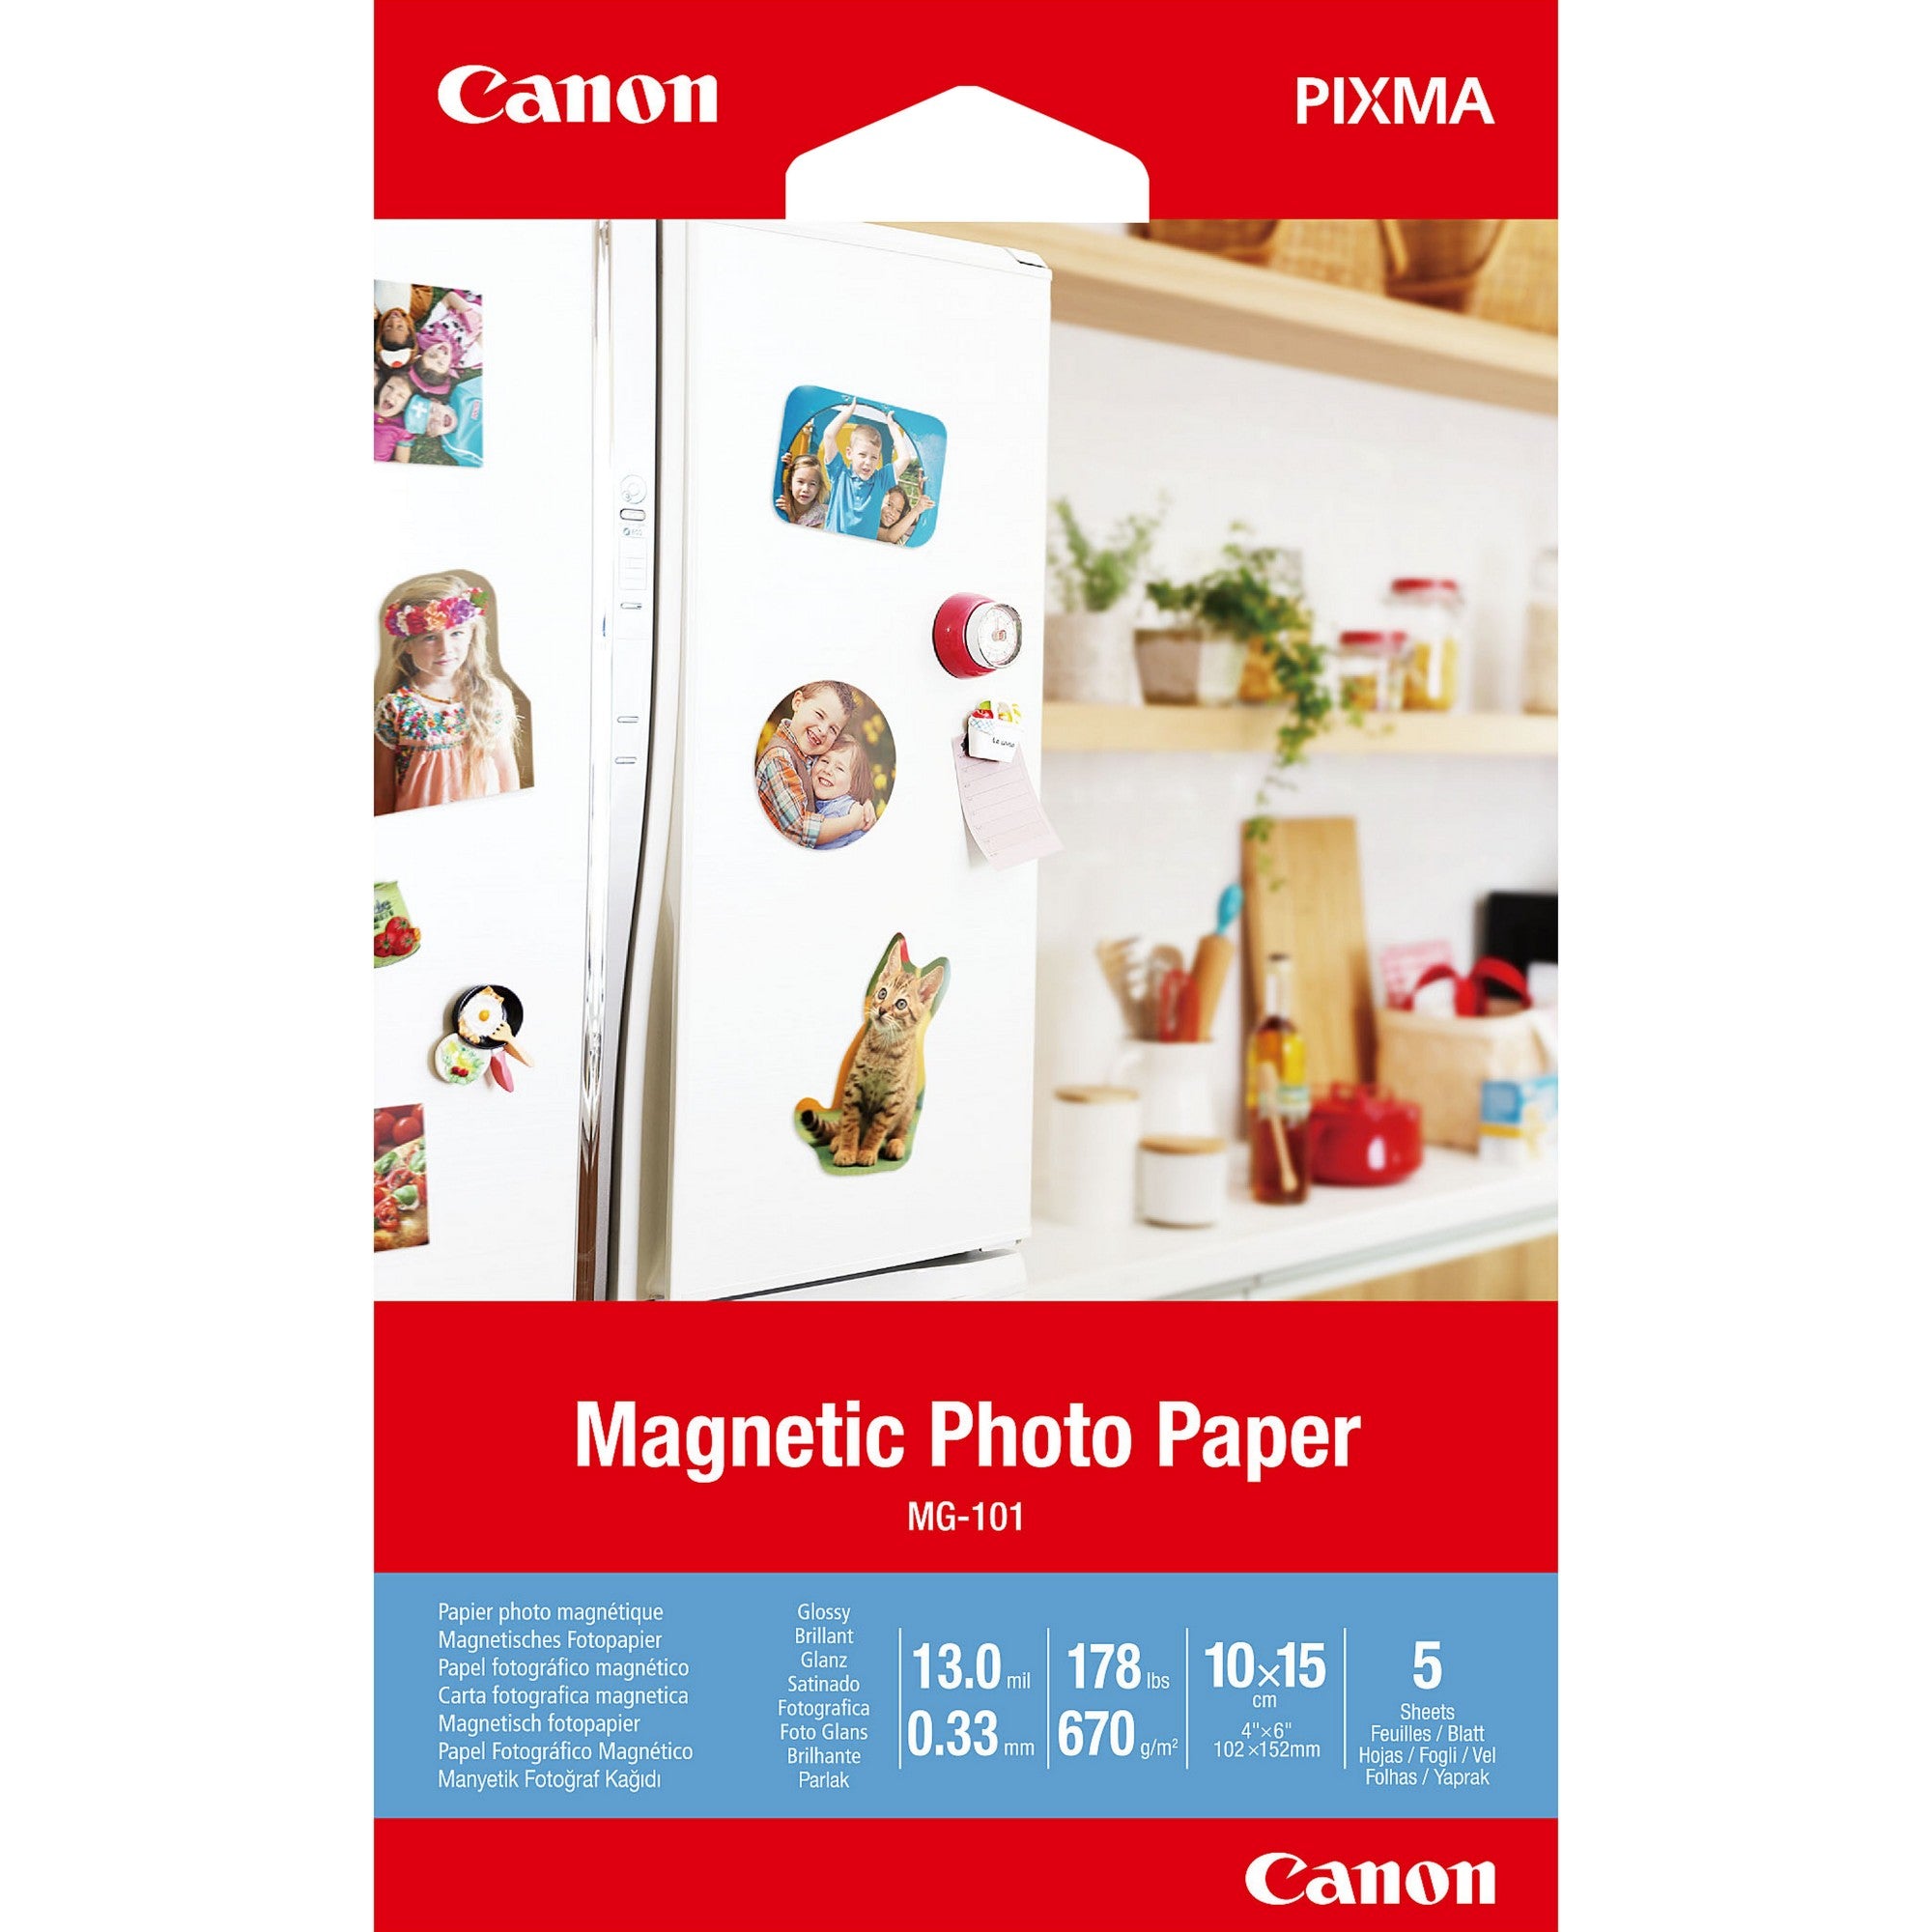 Canon MG-101 Magnetic Photo Paper, 4x6", 5 sheets